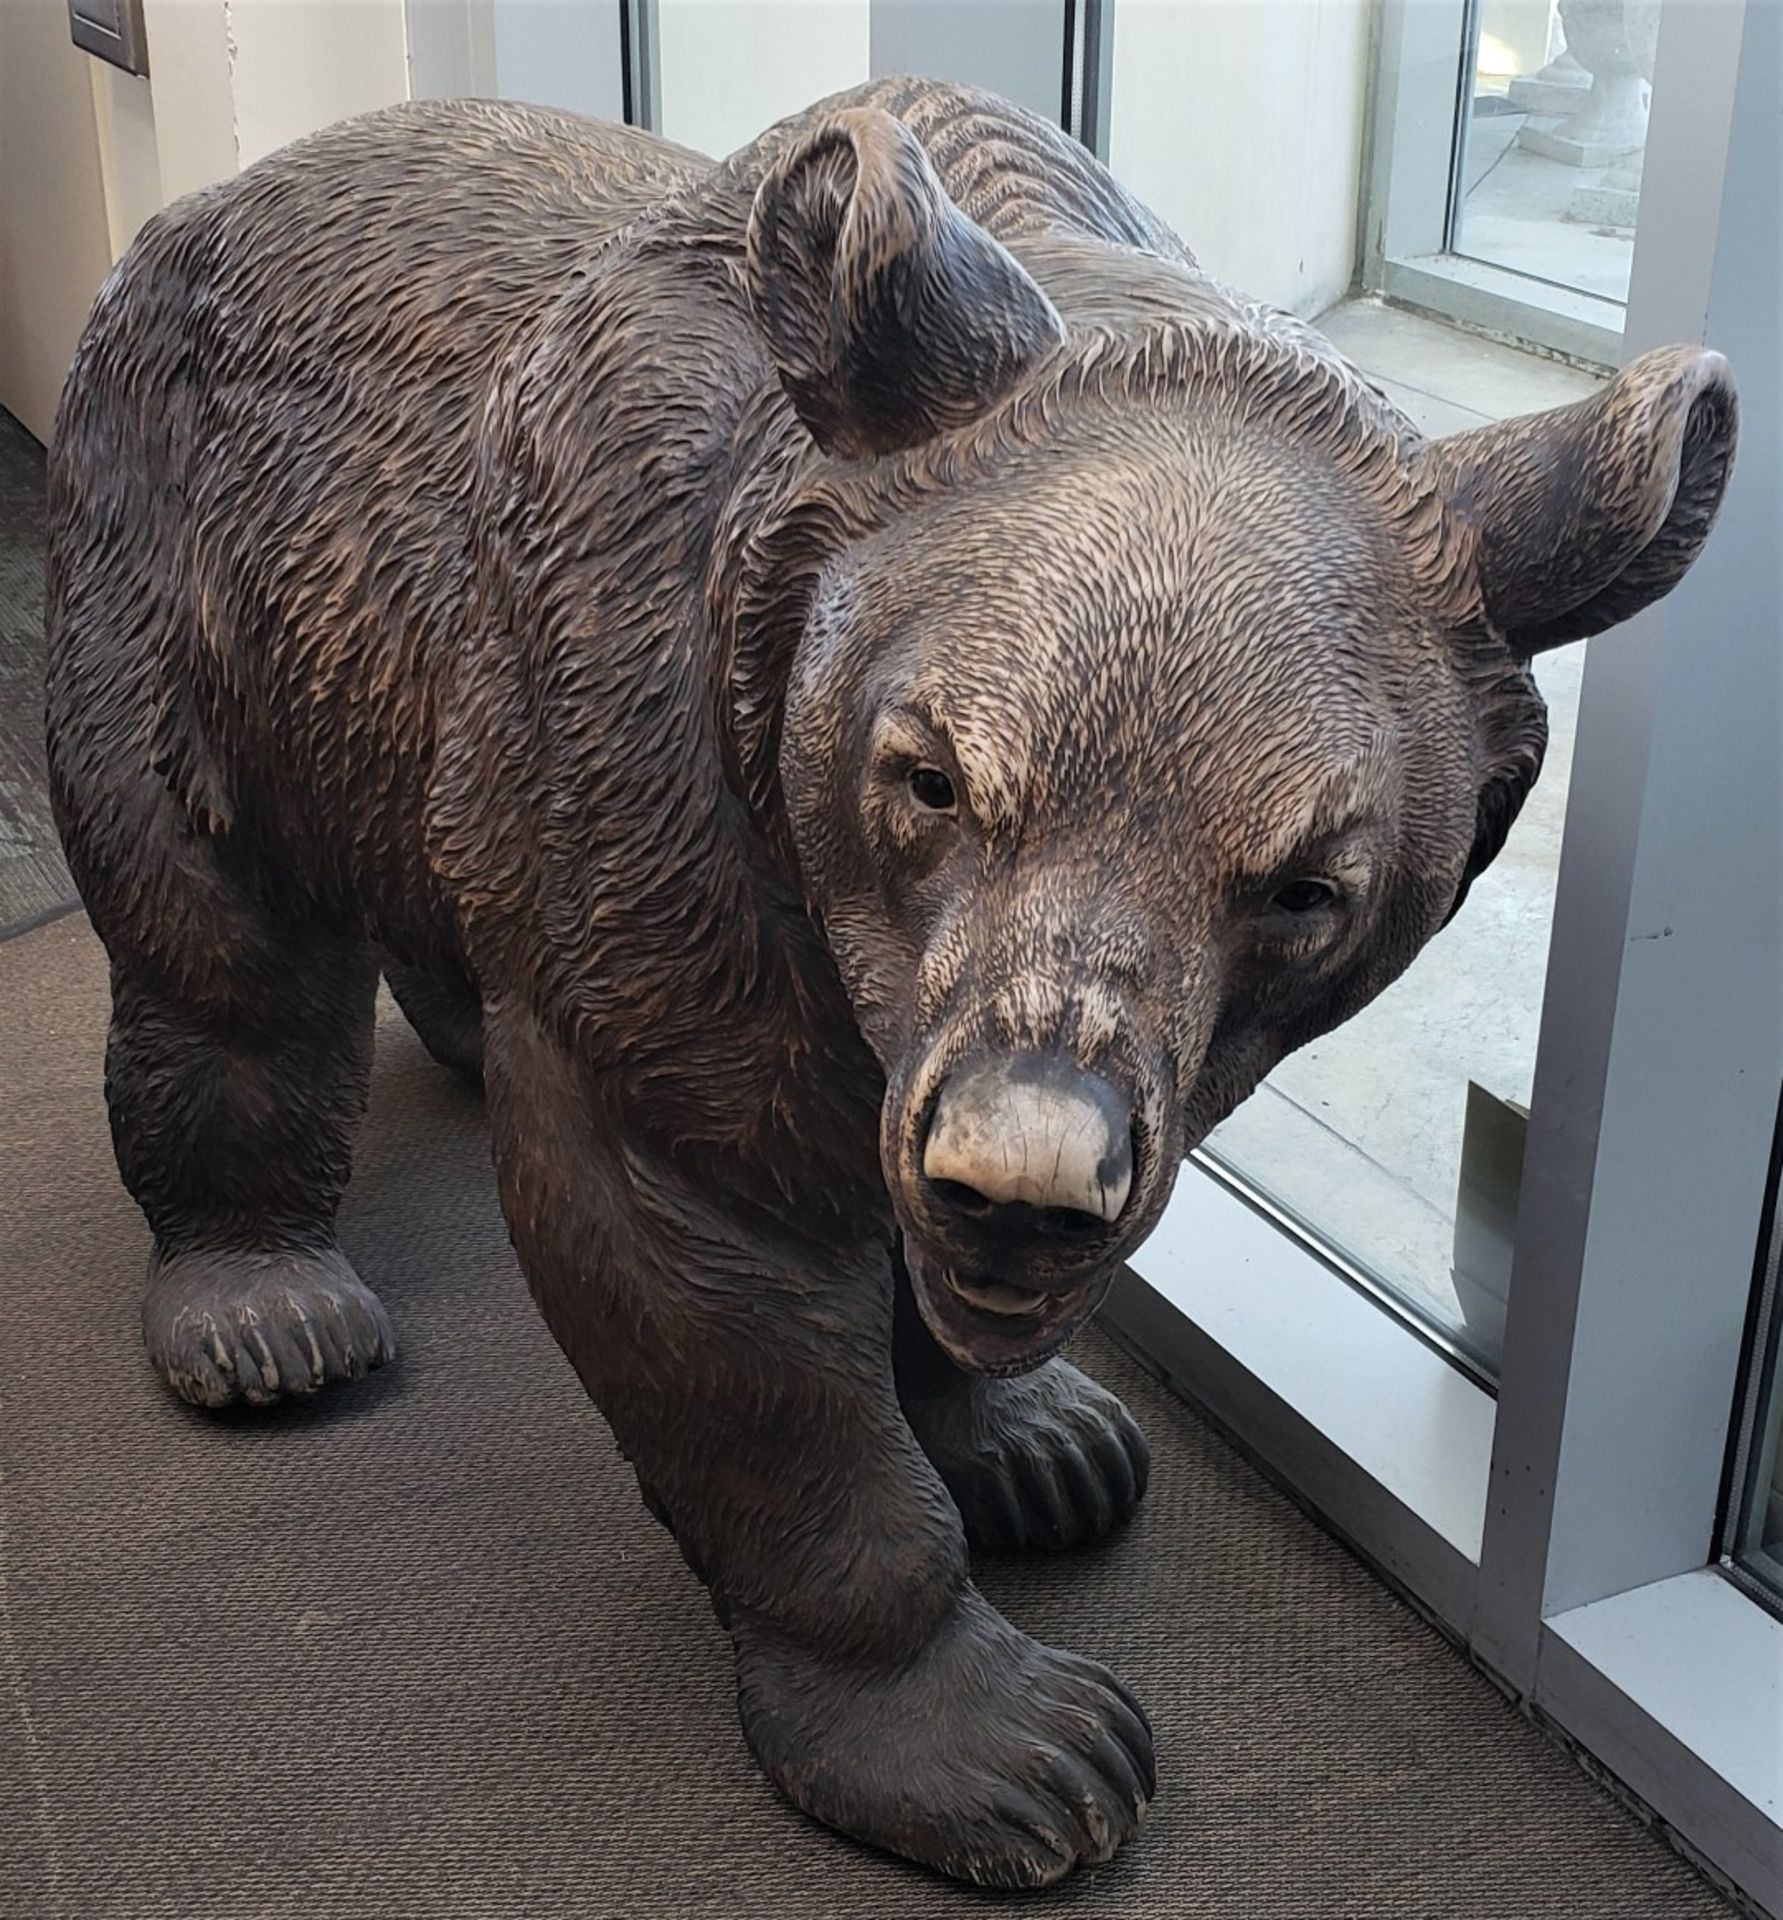 Carved Wooden Bear Statue - Image 2 of 4